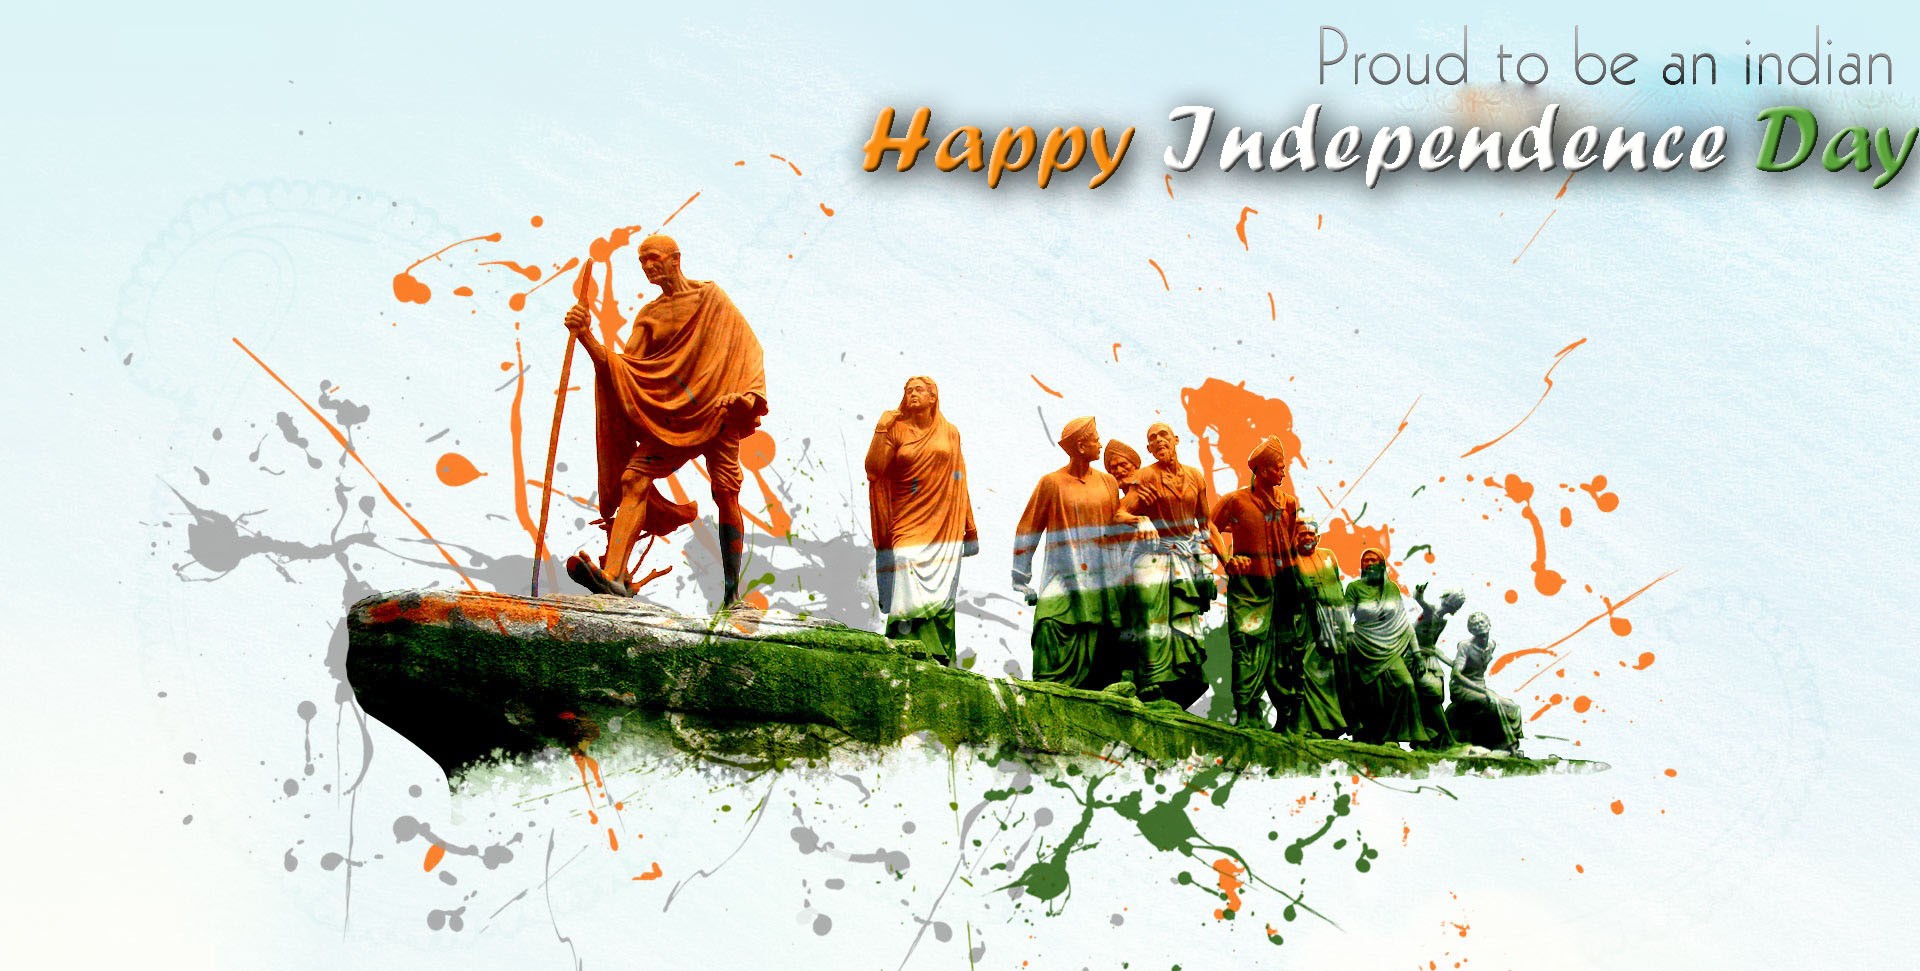 Happy Independence Day 2021 wishes